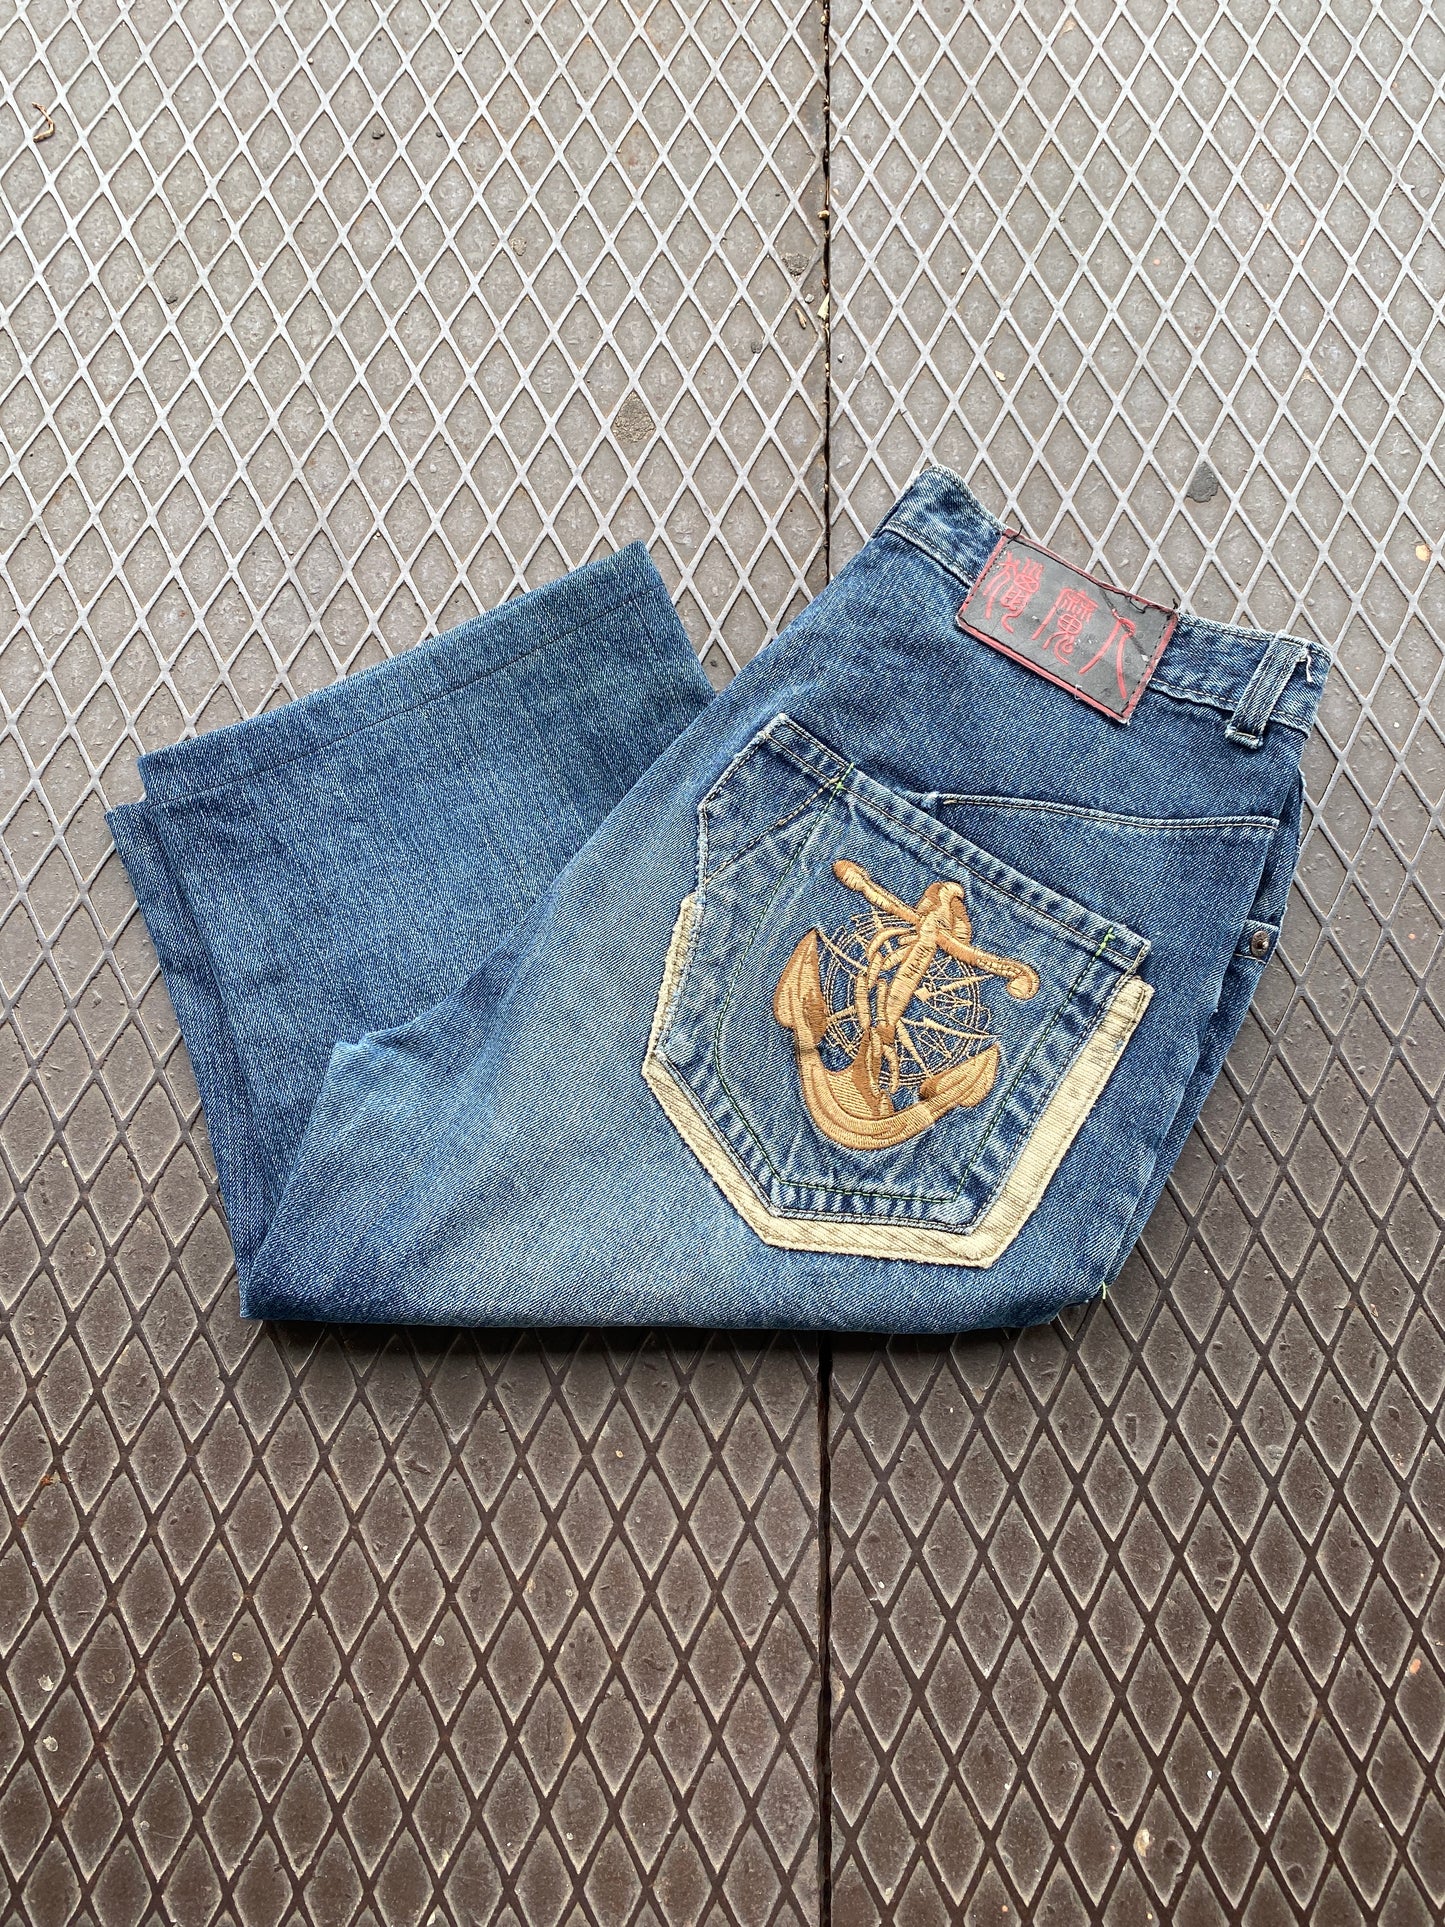 33 - LMR Jeans Denim Shorts Anchor Embroidery